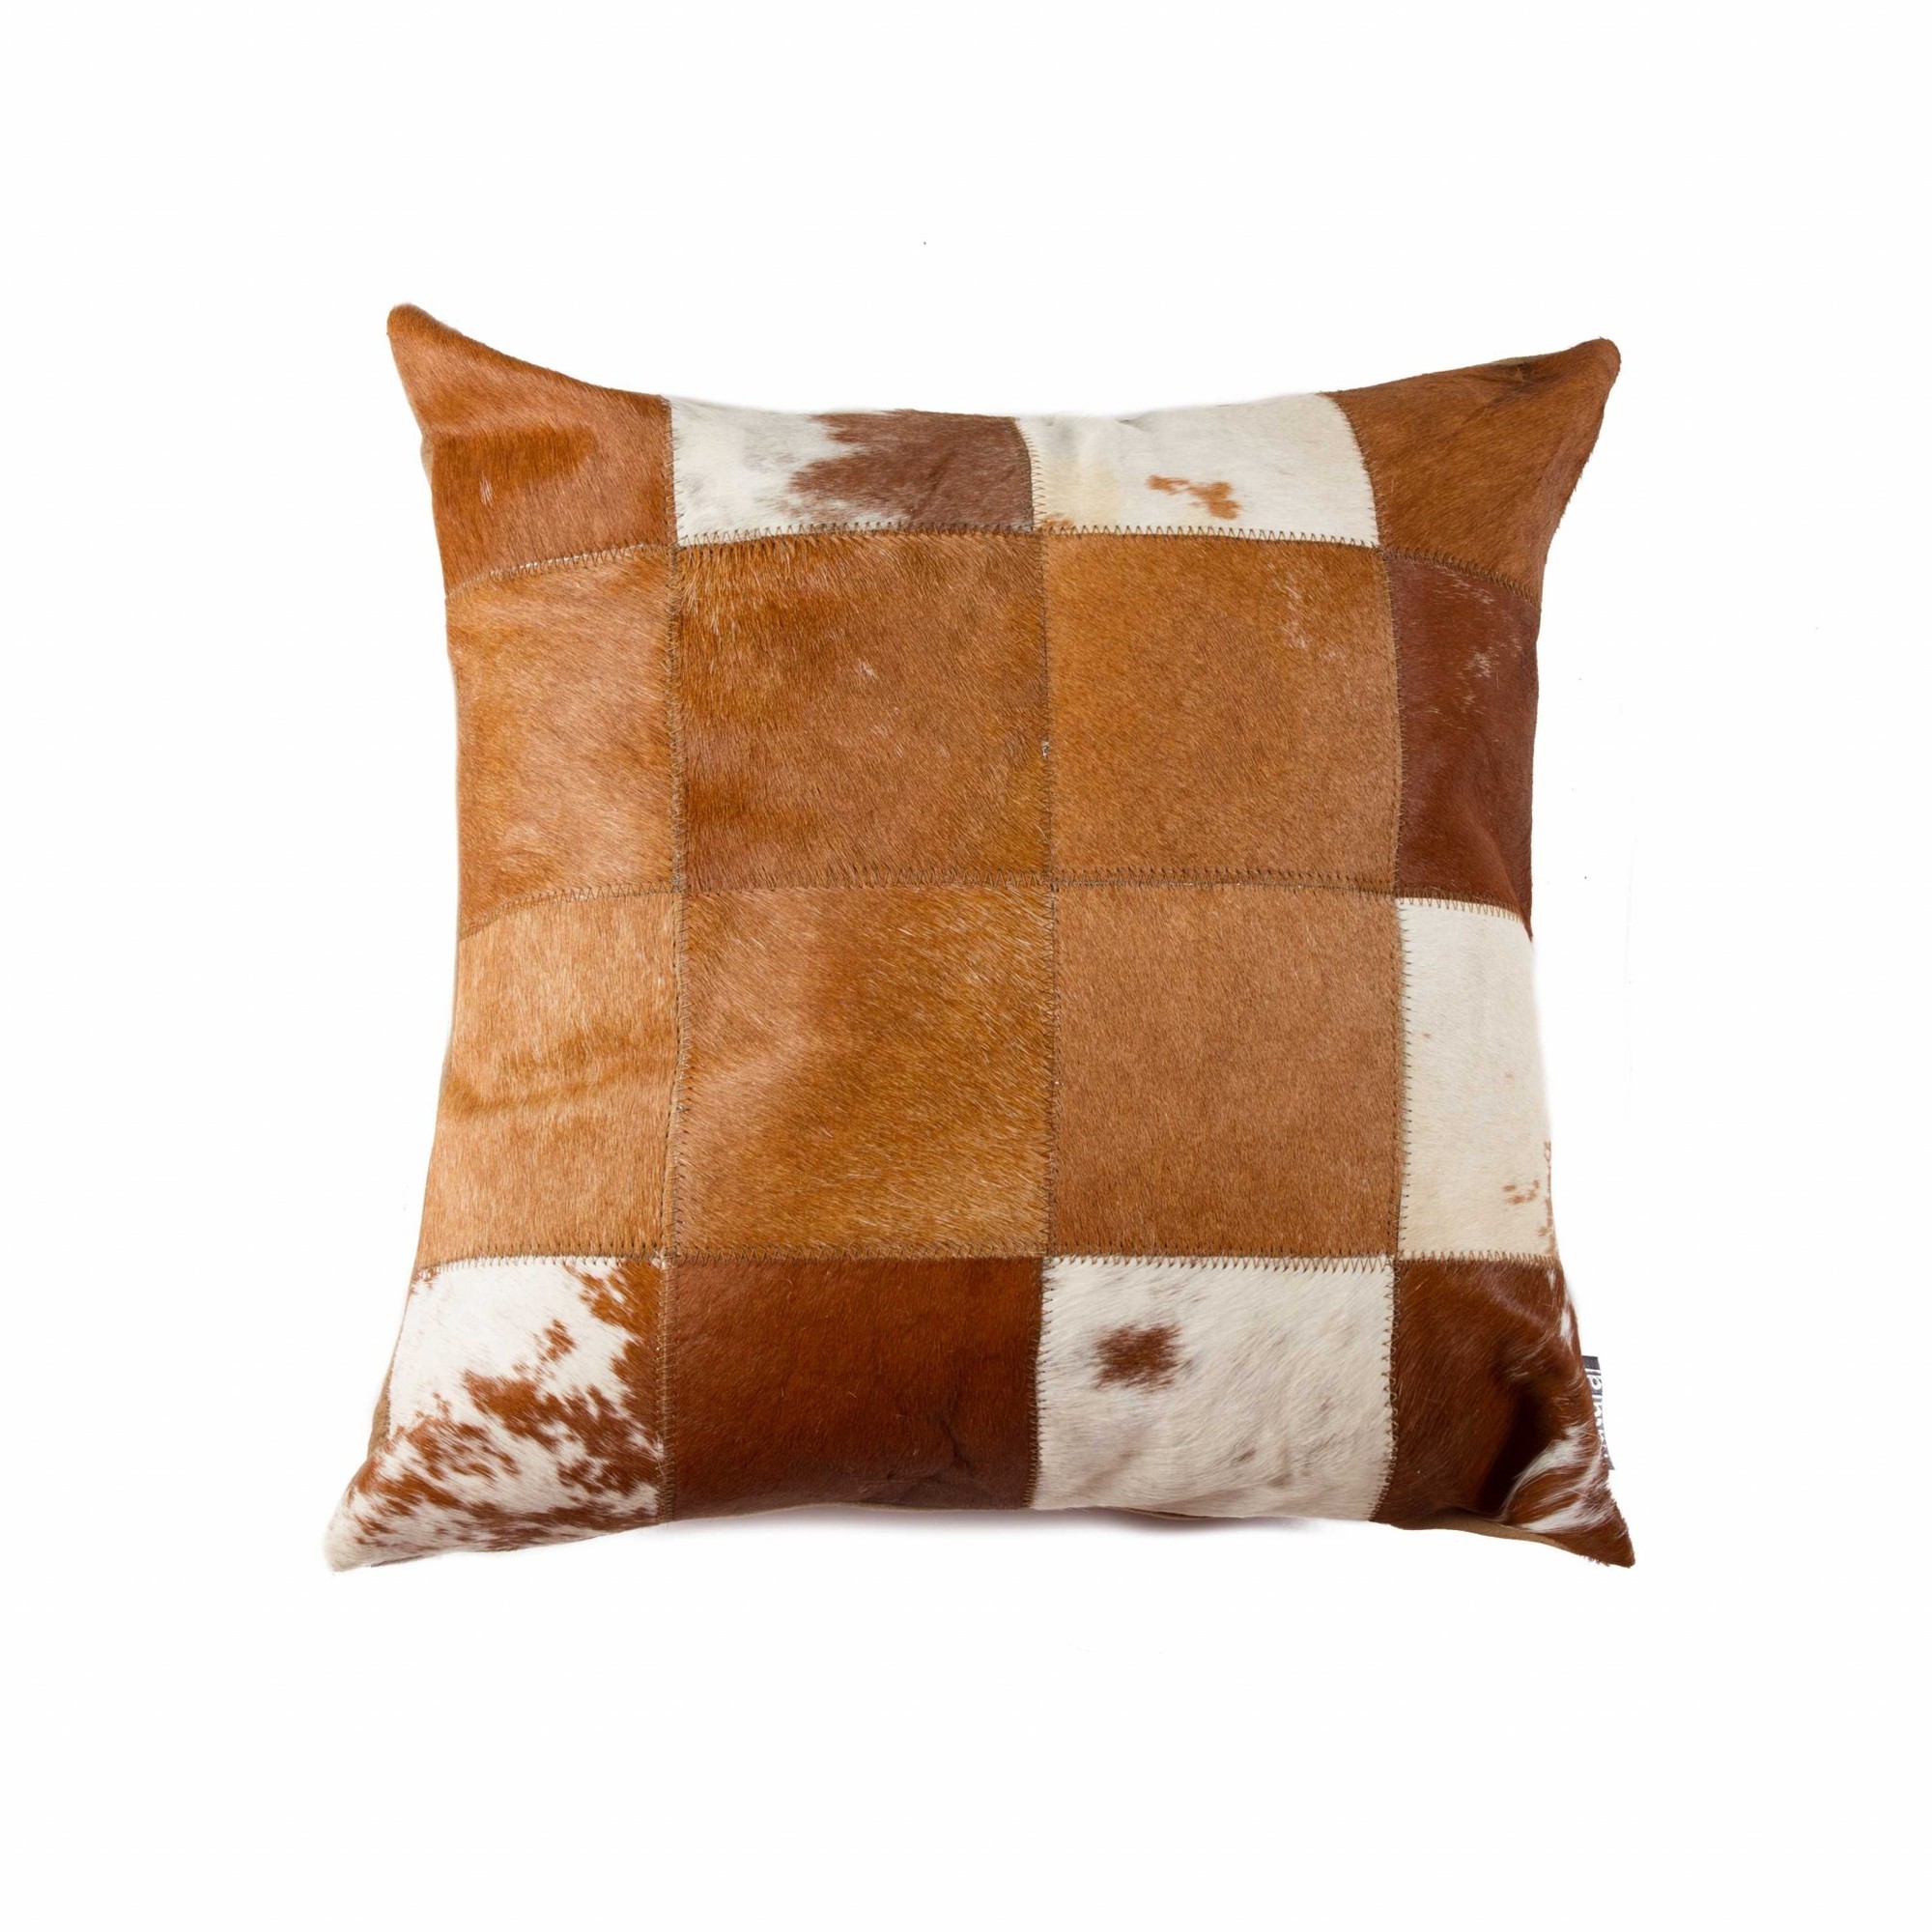 18" x 18" x 5" Brown And White Patchwork Cowhide - Pillow